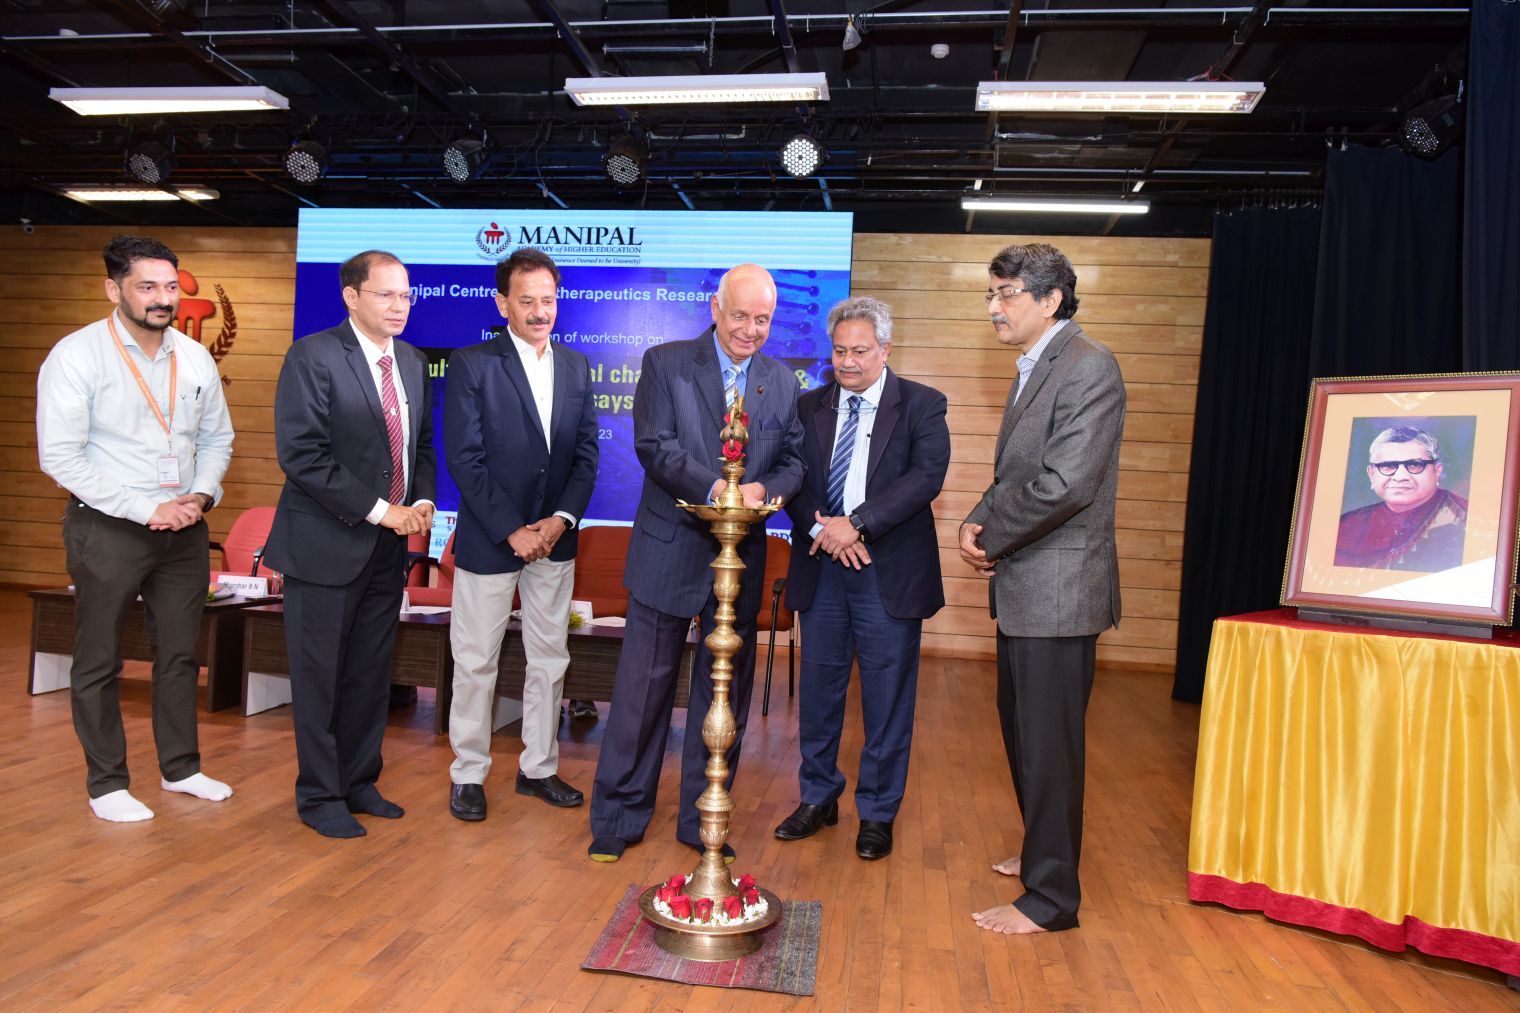 Workshop on stem cell techniques at unveiled at Manipal Centre for Biotherapeutics Research